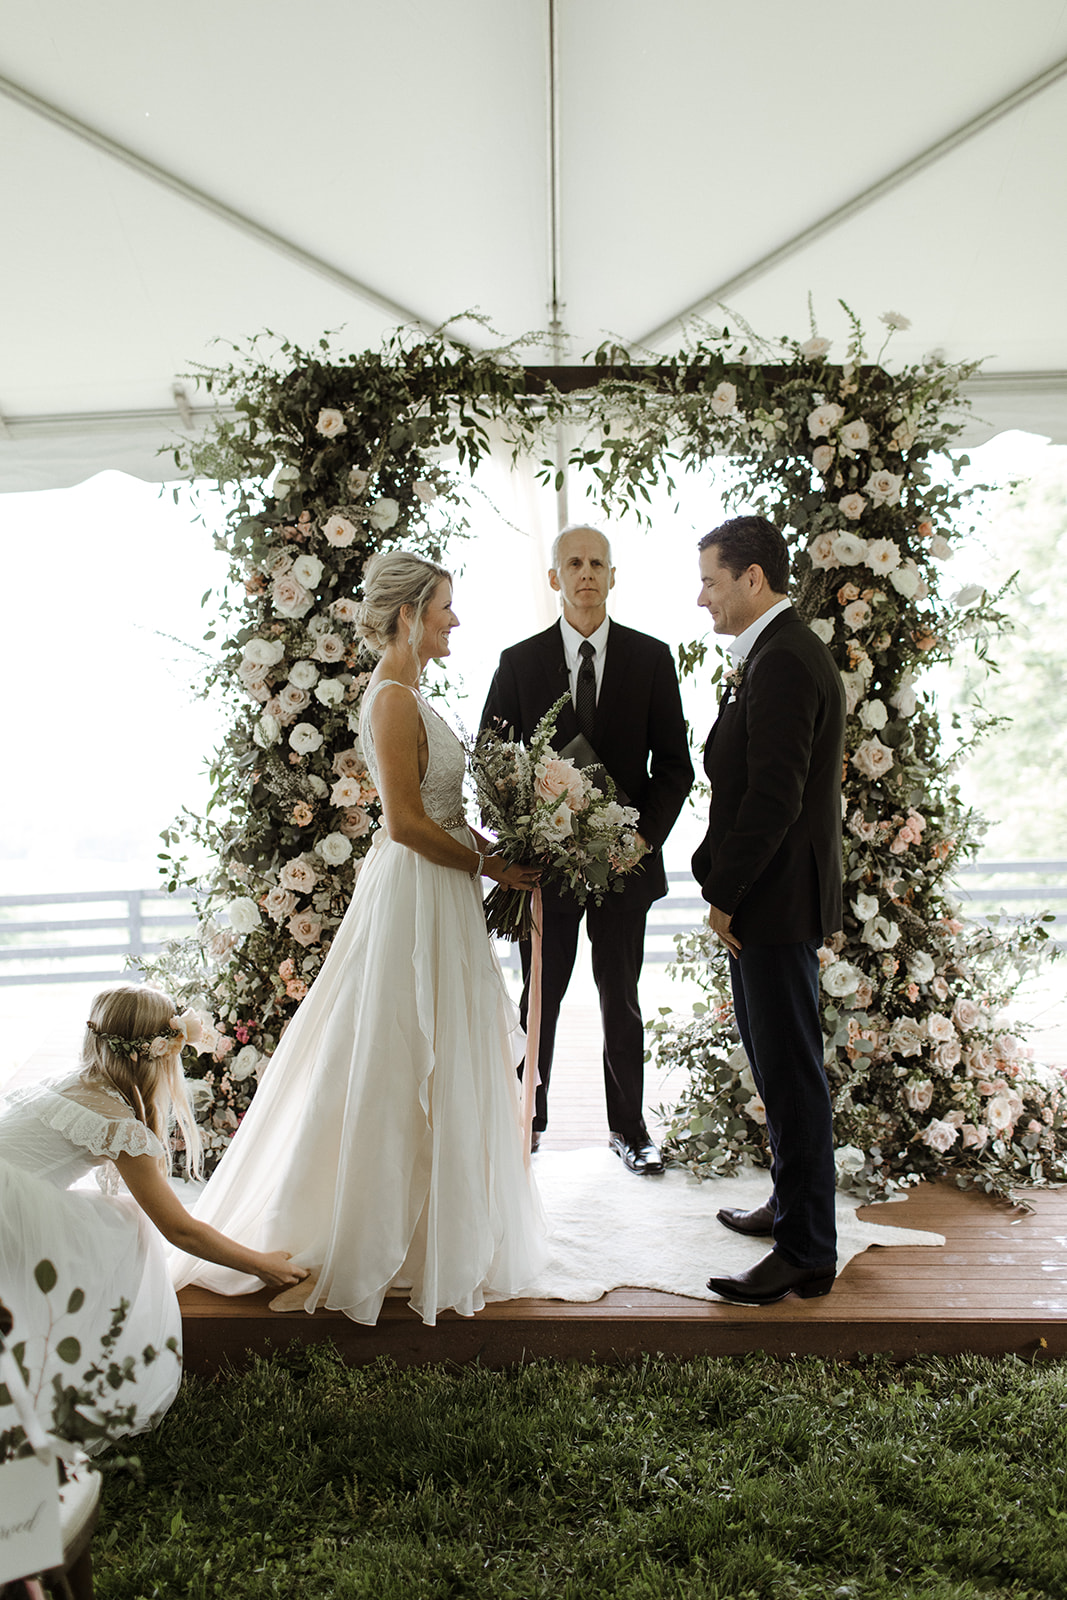 Rustic, countryside wedding outside Nashville with garden-inspired floral design.